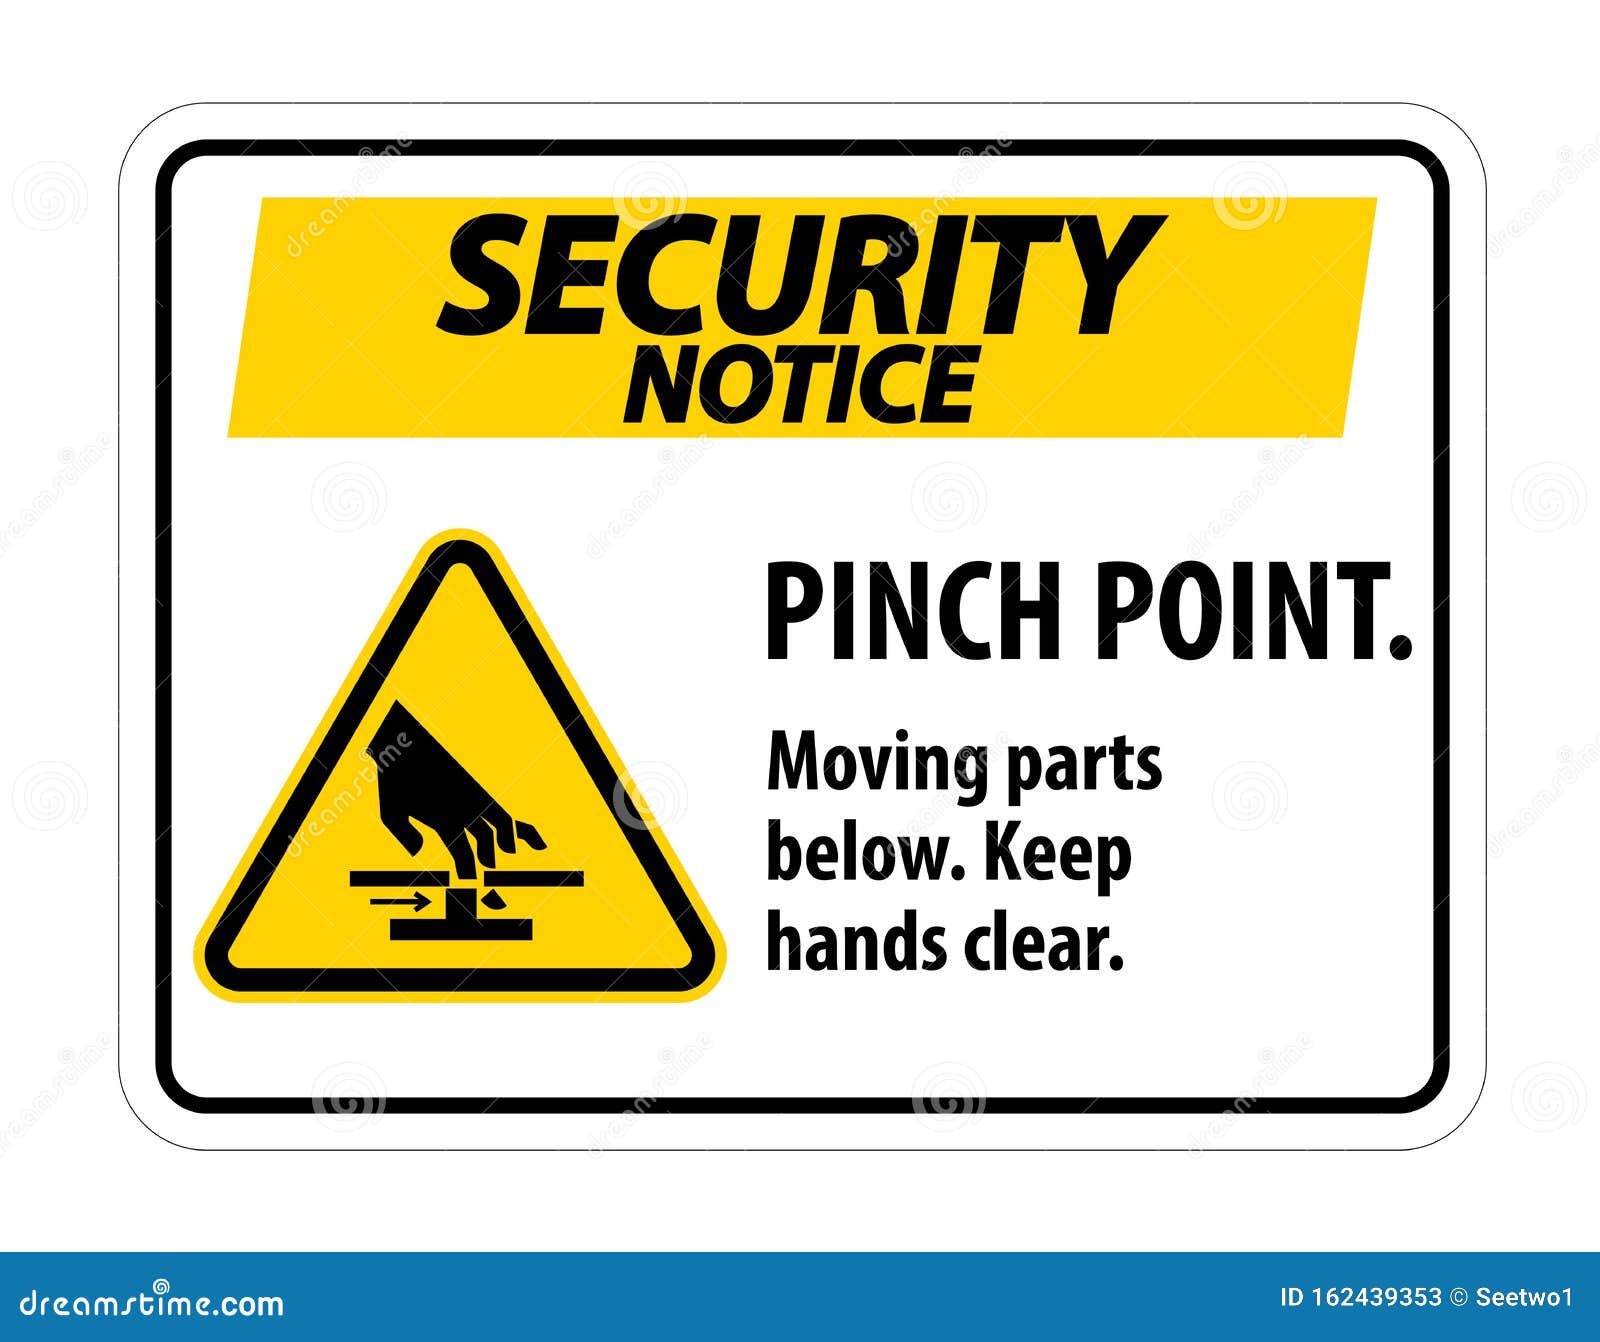 Keep point. Знак Pinch point. Pinch point Safety. Keep hands Clear. Keep hands Clear sign.